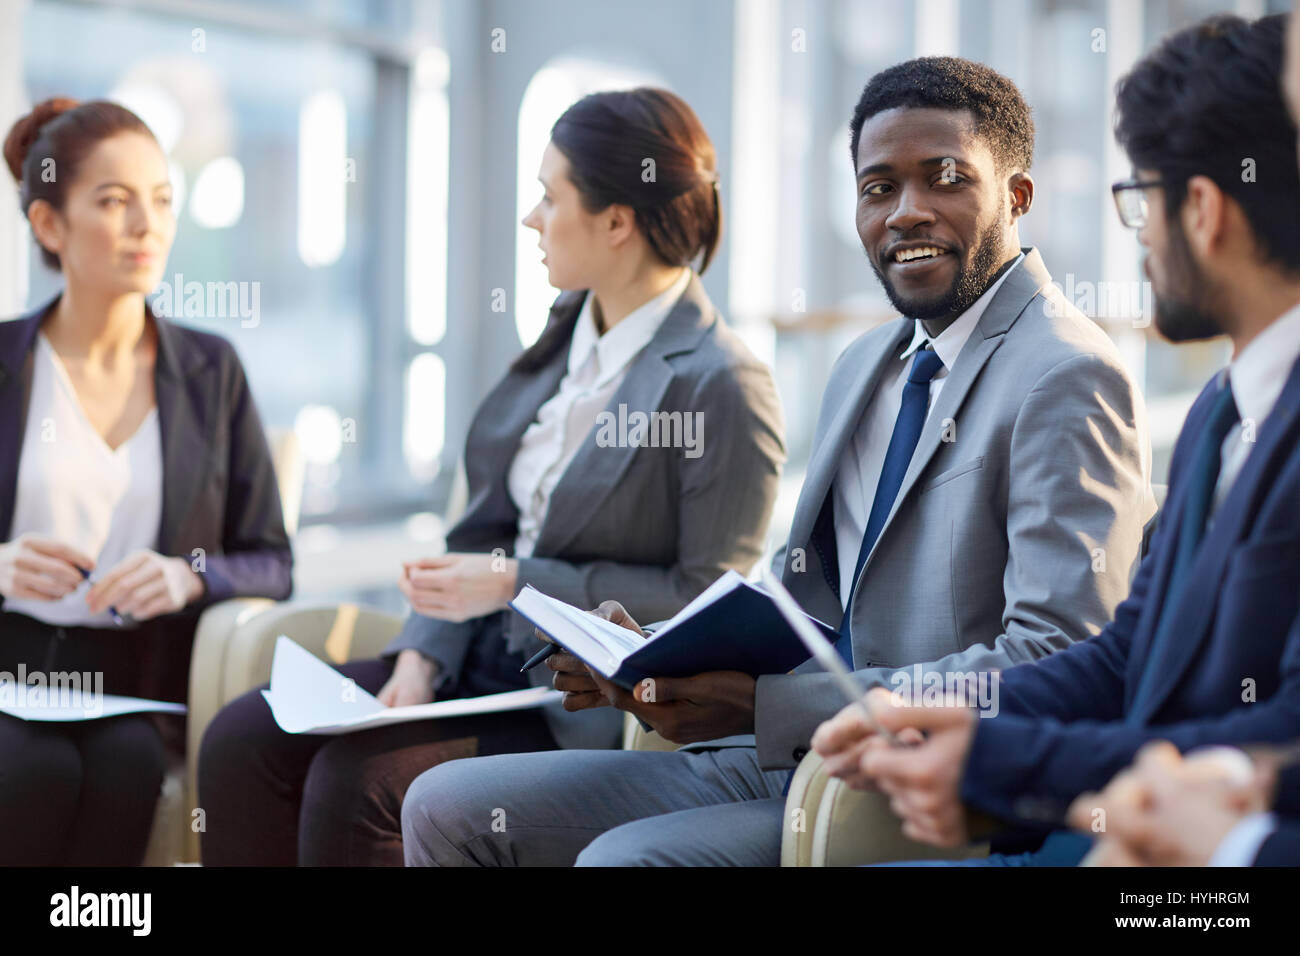 Audience of business course Stock Photo